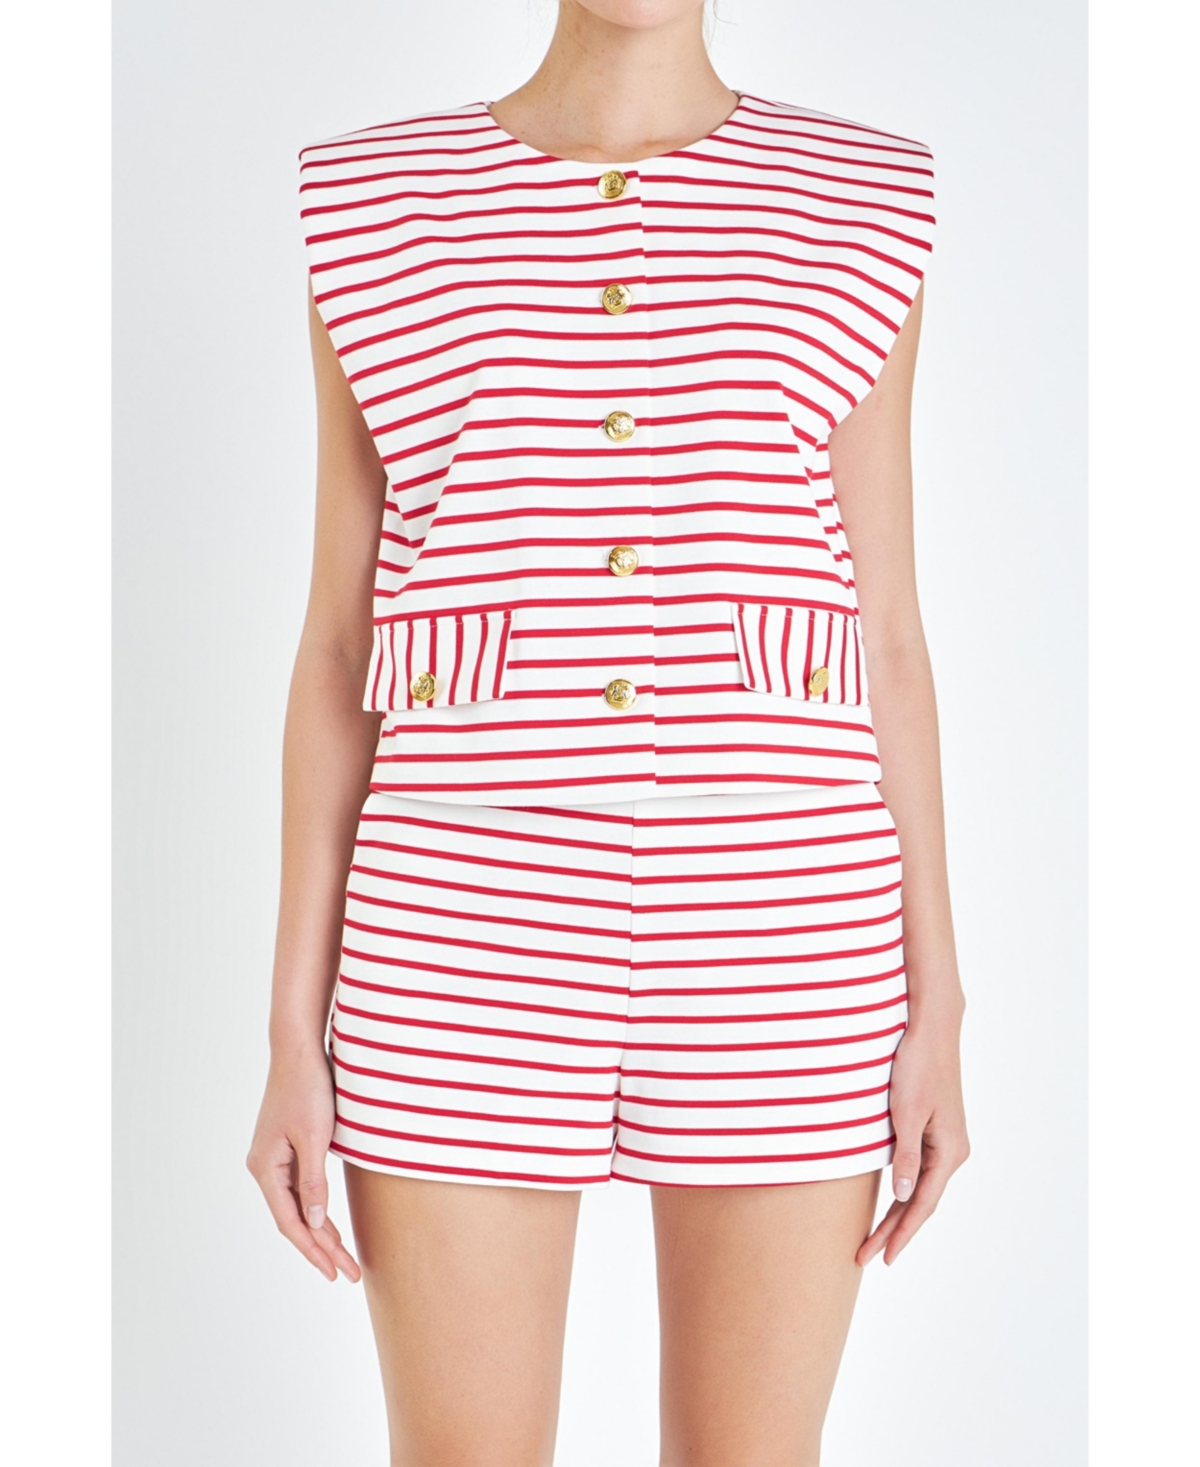 Women's Striped Top - White/red